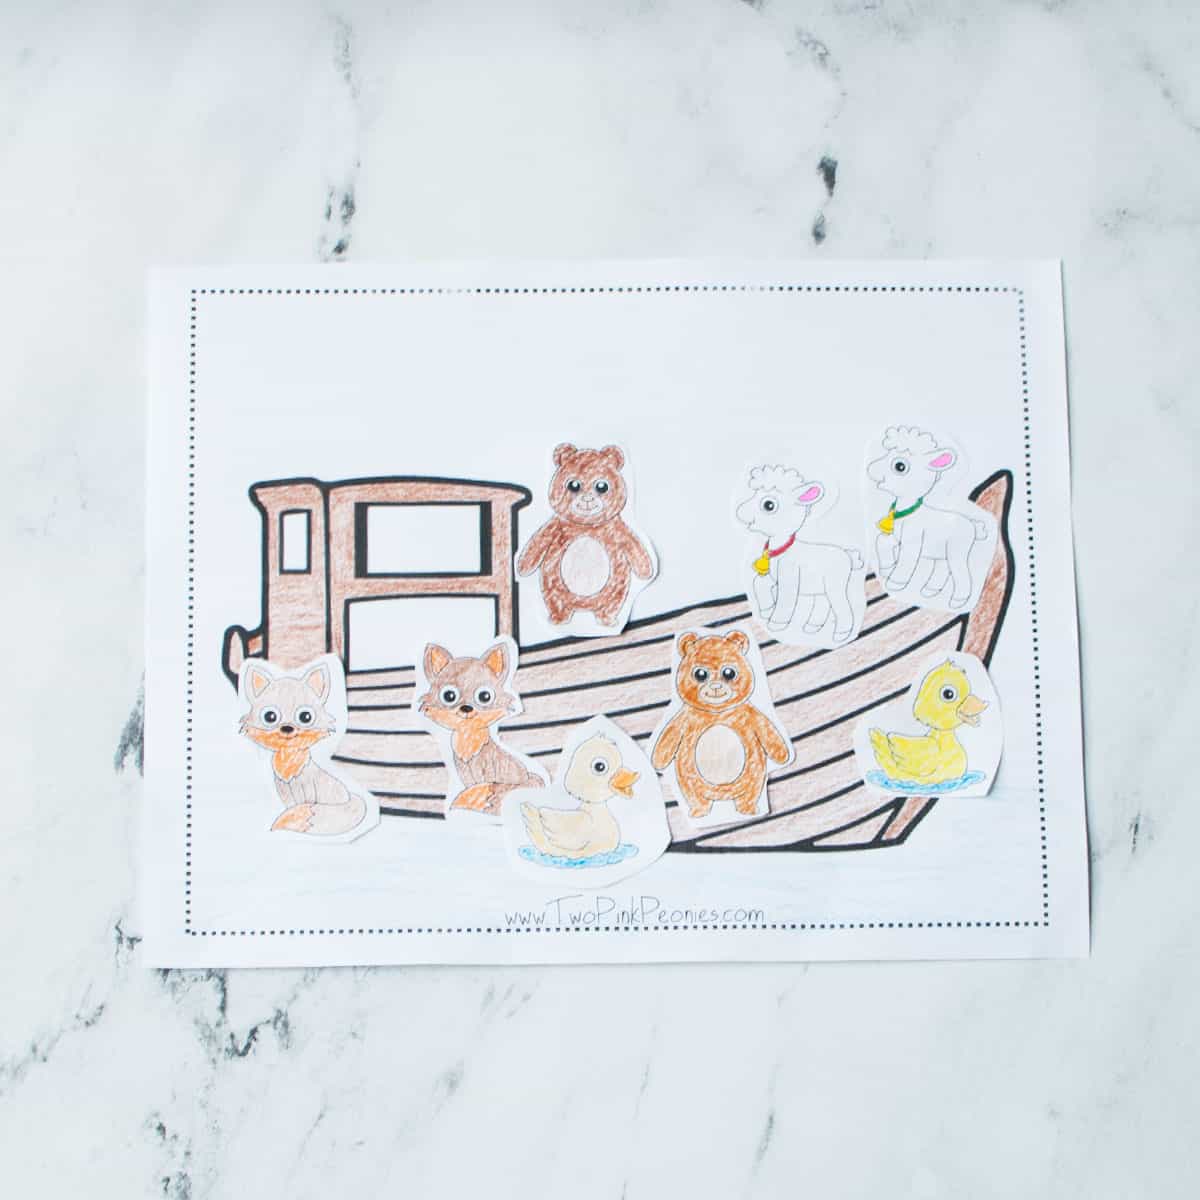 Noah's ark printable colored in with animals glued to it